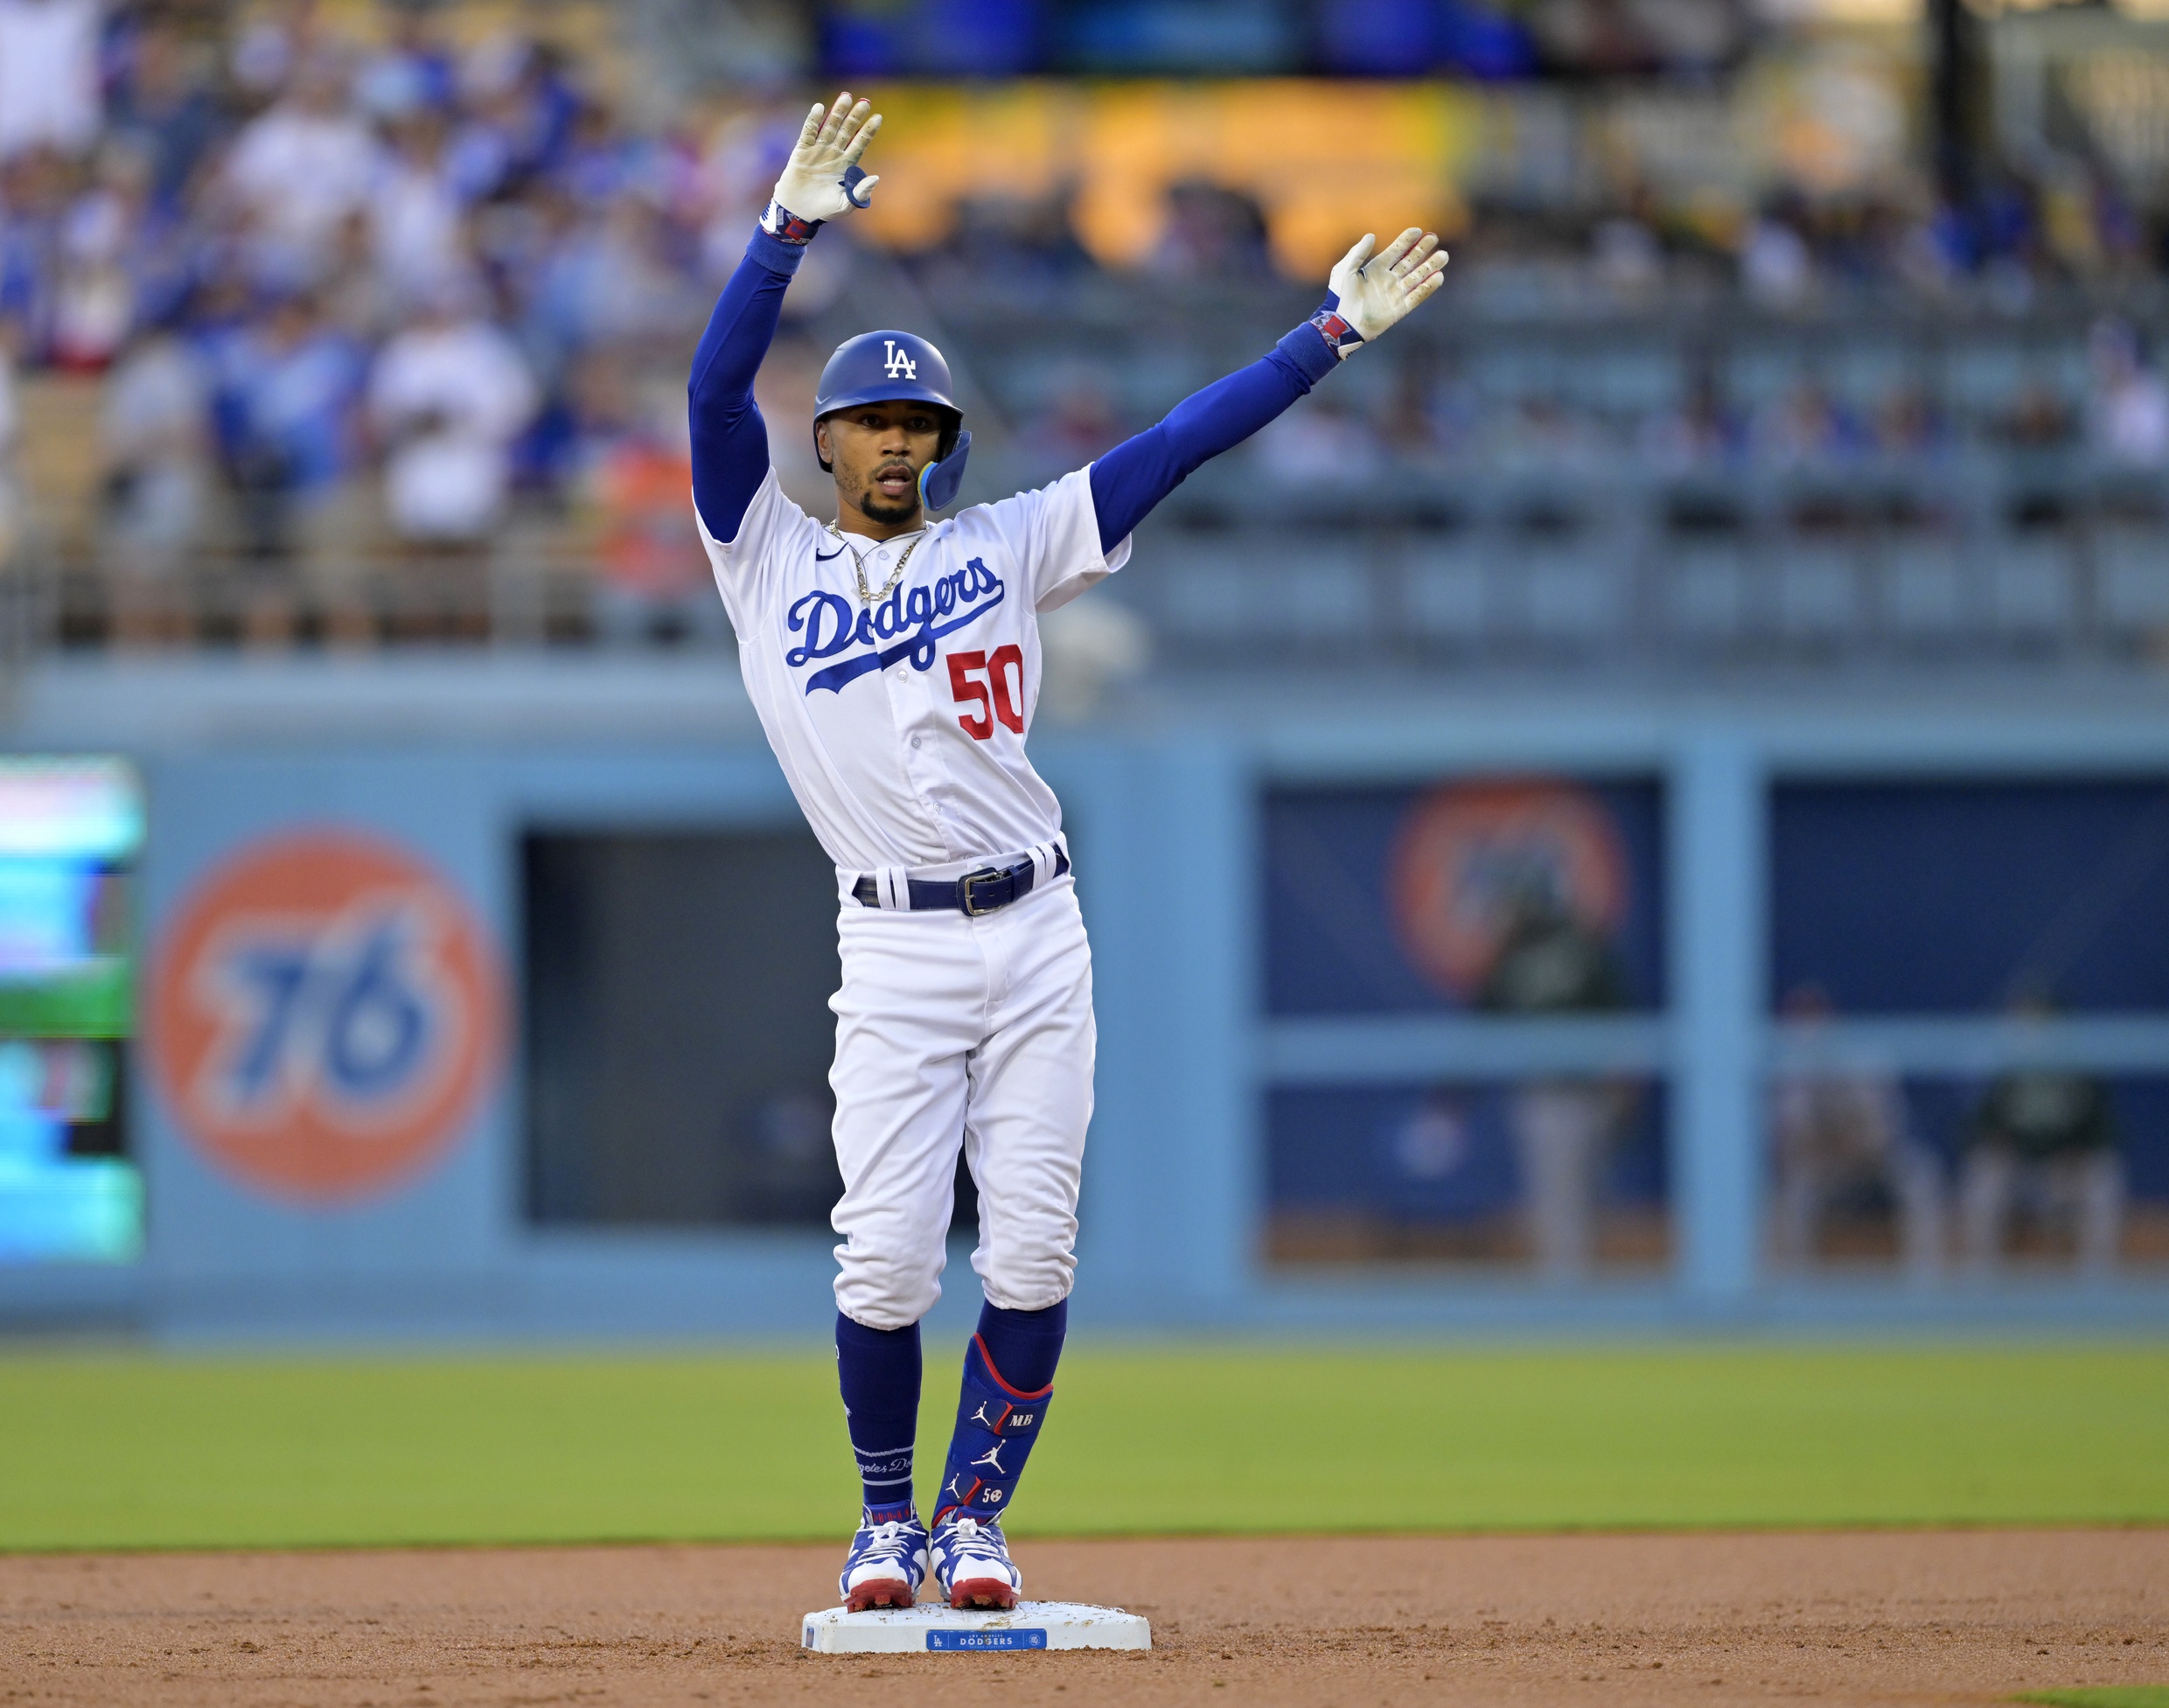 A closer look at the Los Angeles Dodgers, Boston's opponent in the